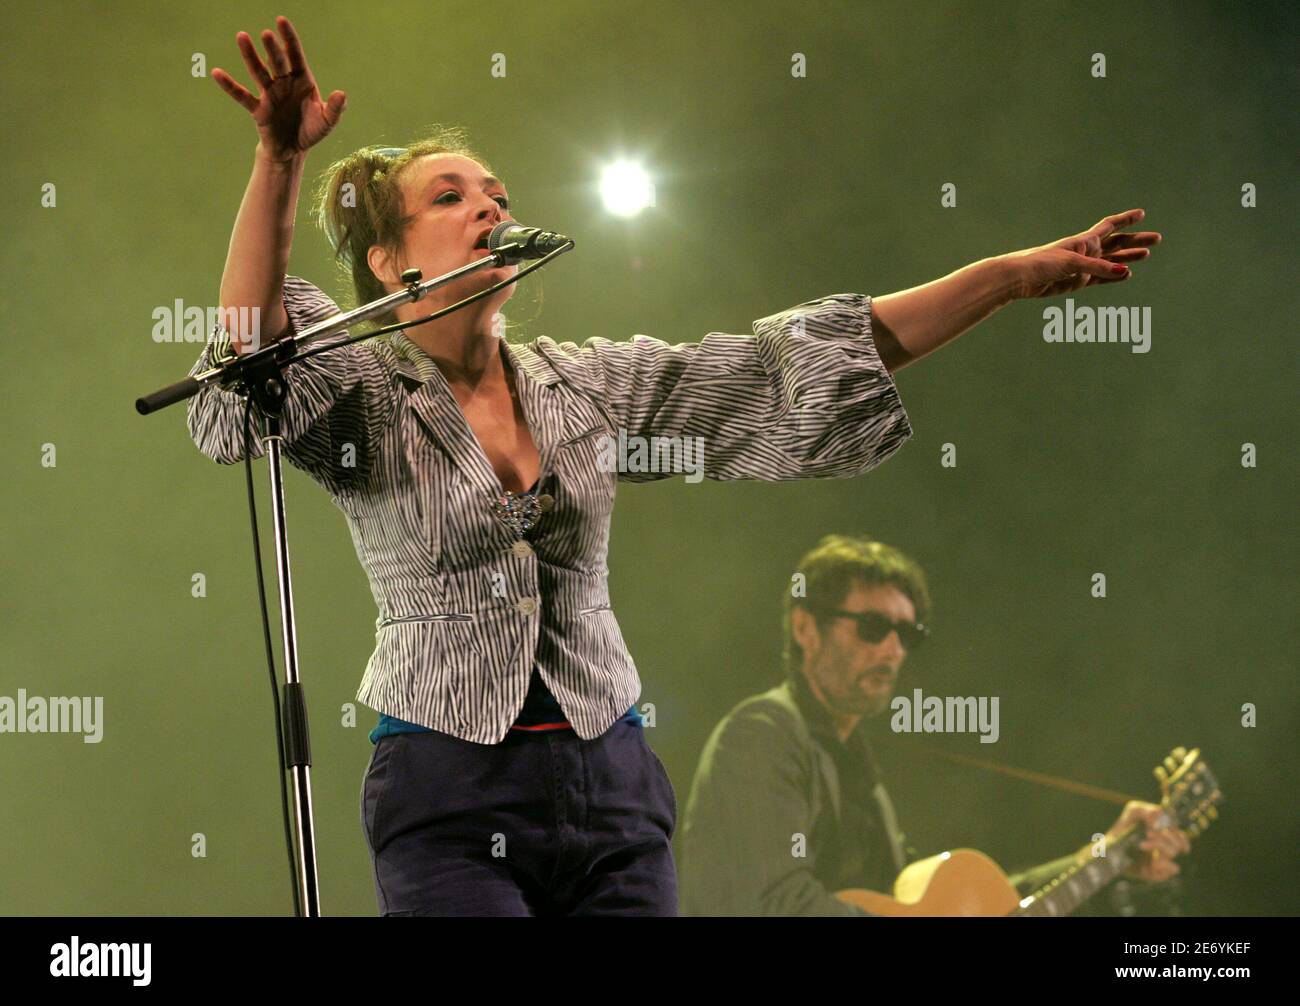 France's Catherine Ringer (L) and Fred Chichin, of the band Les Rita  Mitsouko, perform on stage during their concert at the Rock-en-Seine  Festival in Saint-Cloud, near Paris, August 25, 2007. REUTERS/Benoit  Tessier (